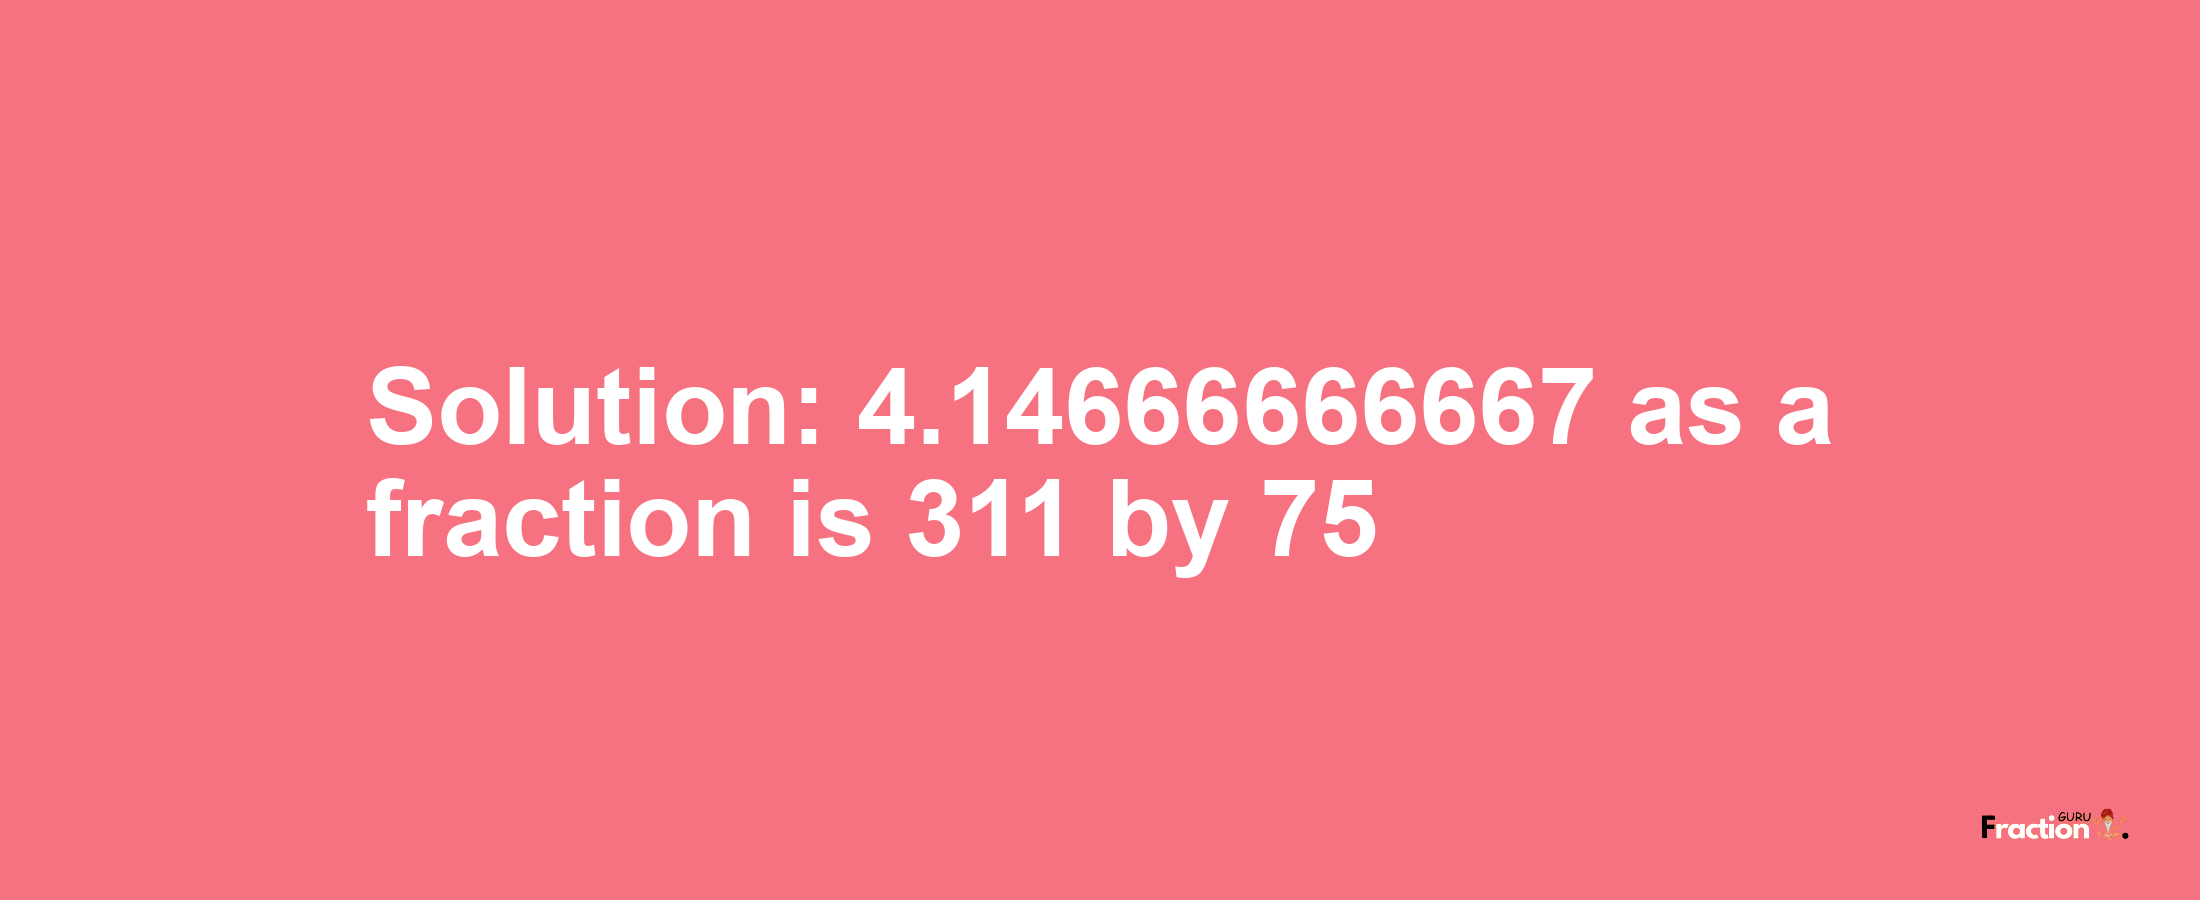 Solution:4.14666666667 as a fraction is 311/75